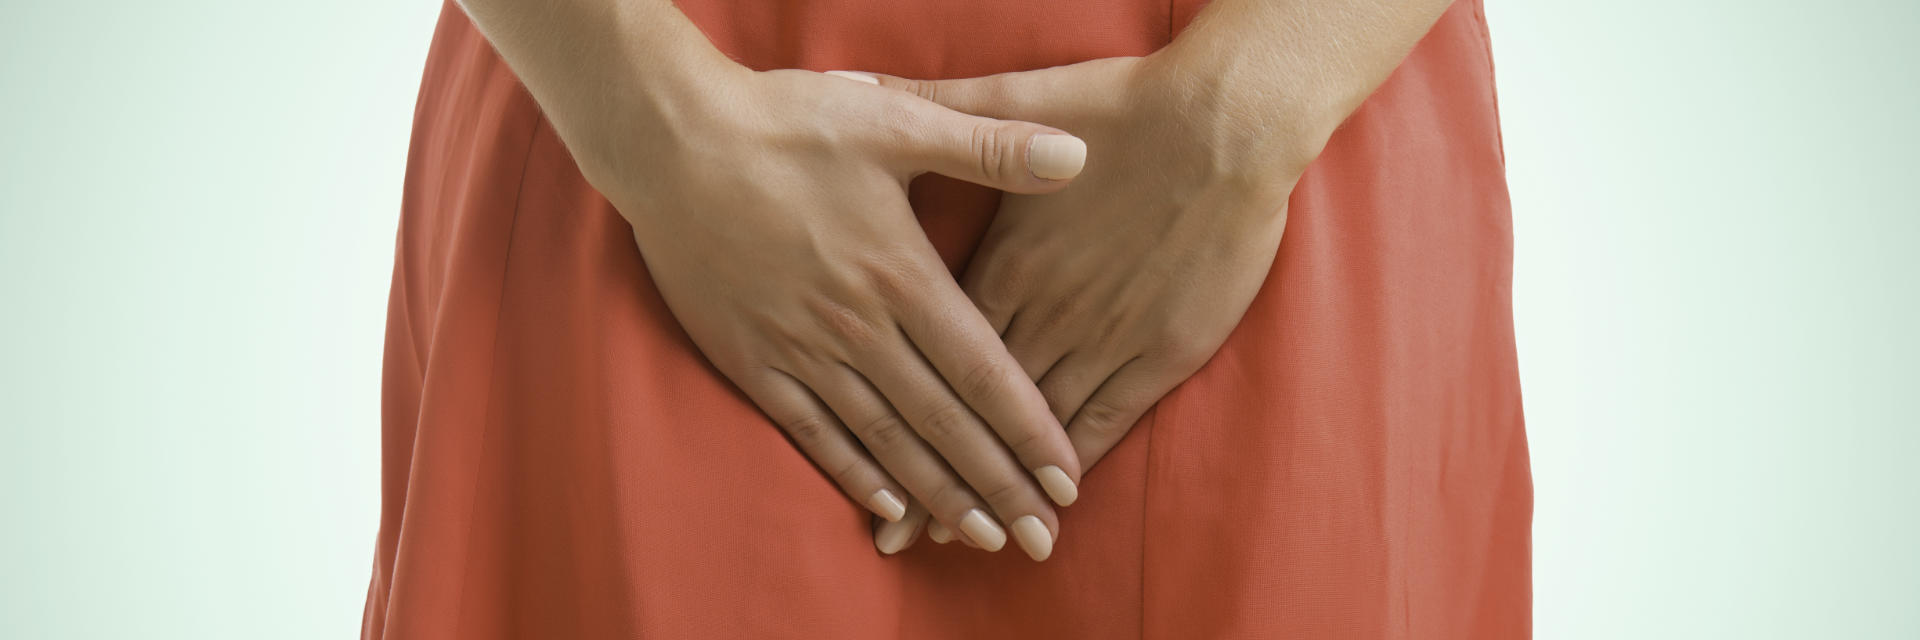 a woman is covering her perine with her hands, pain related to Pudendal Neuralgia